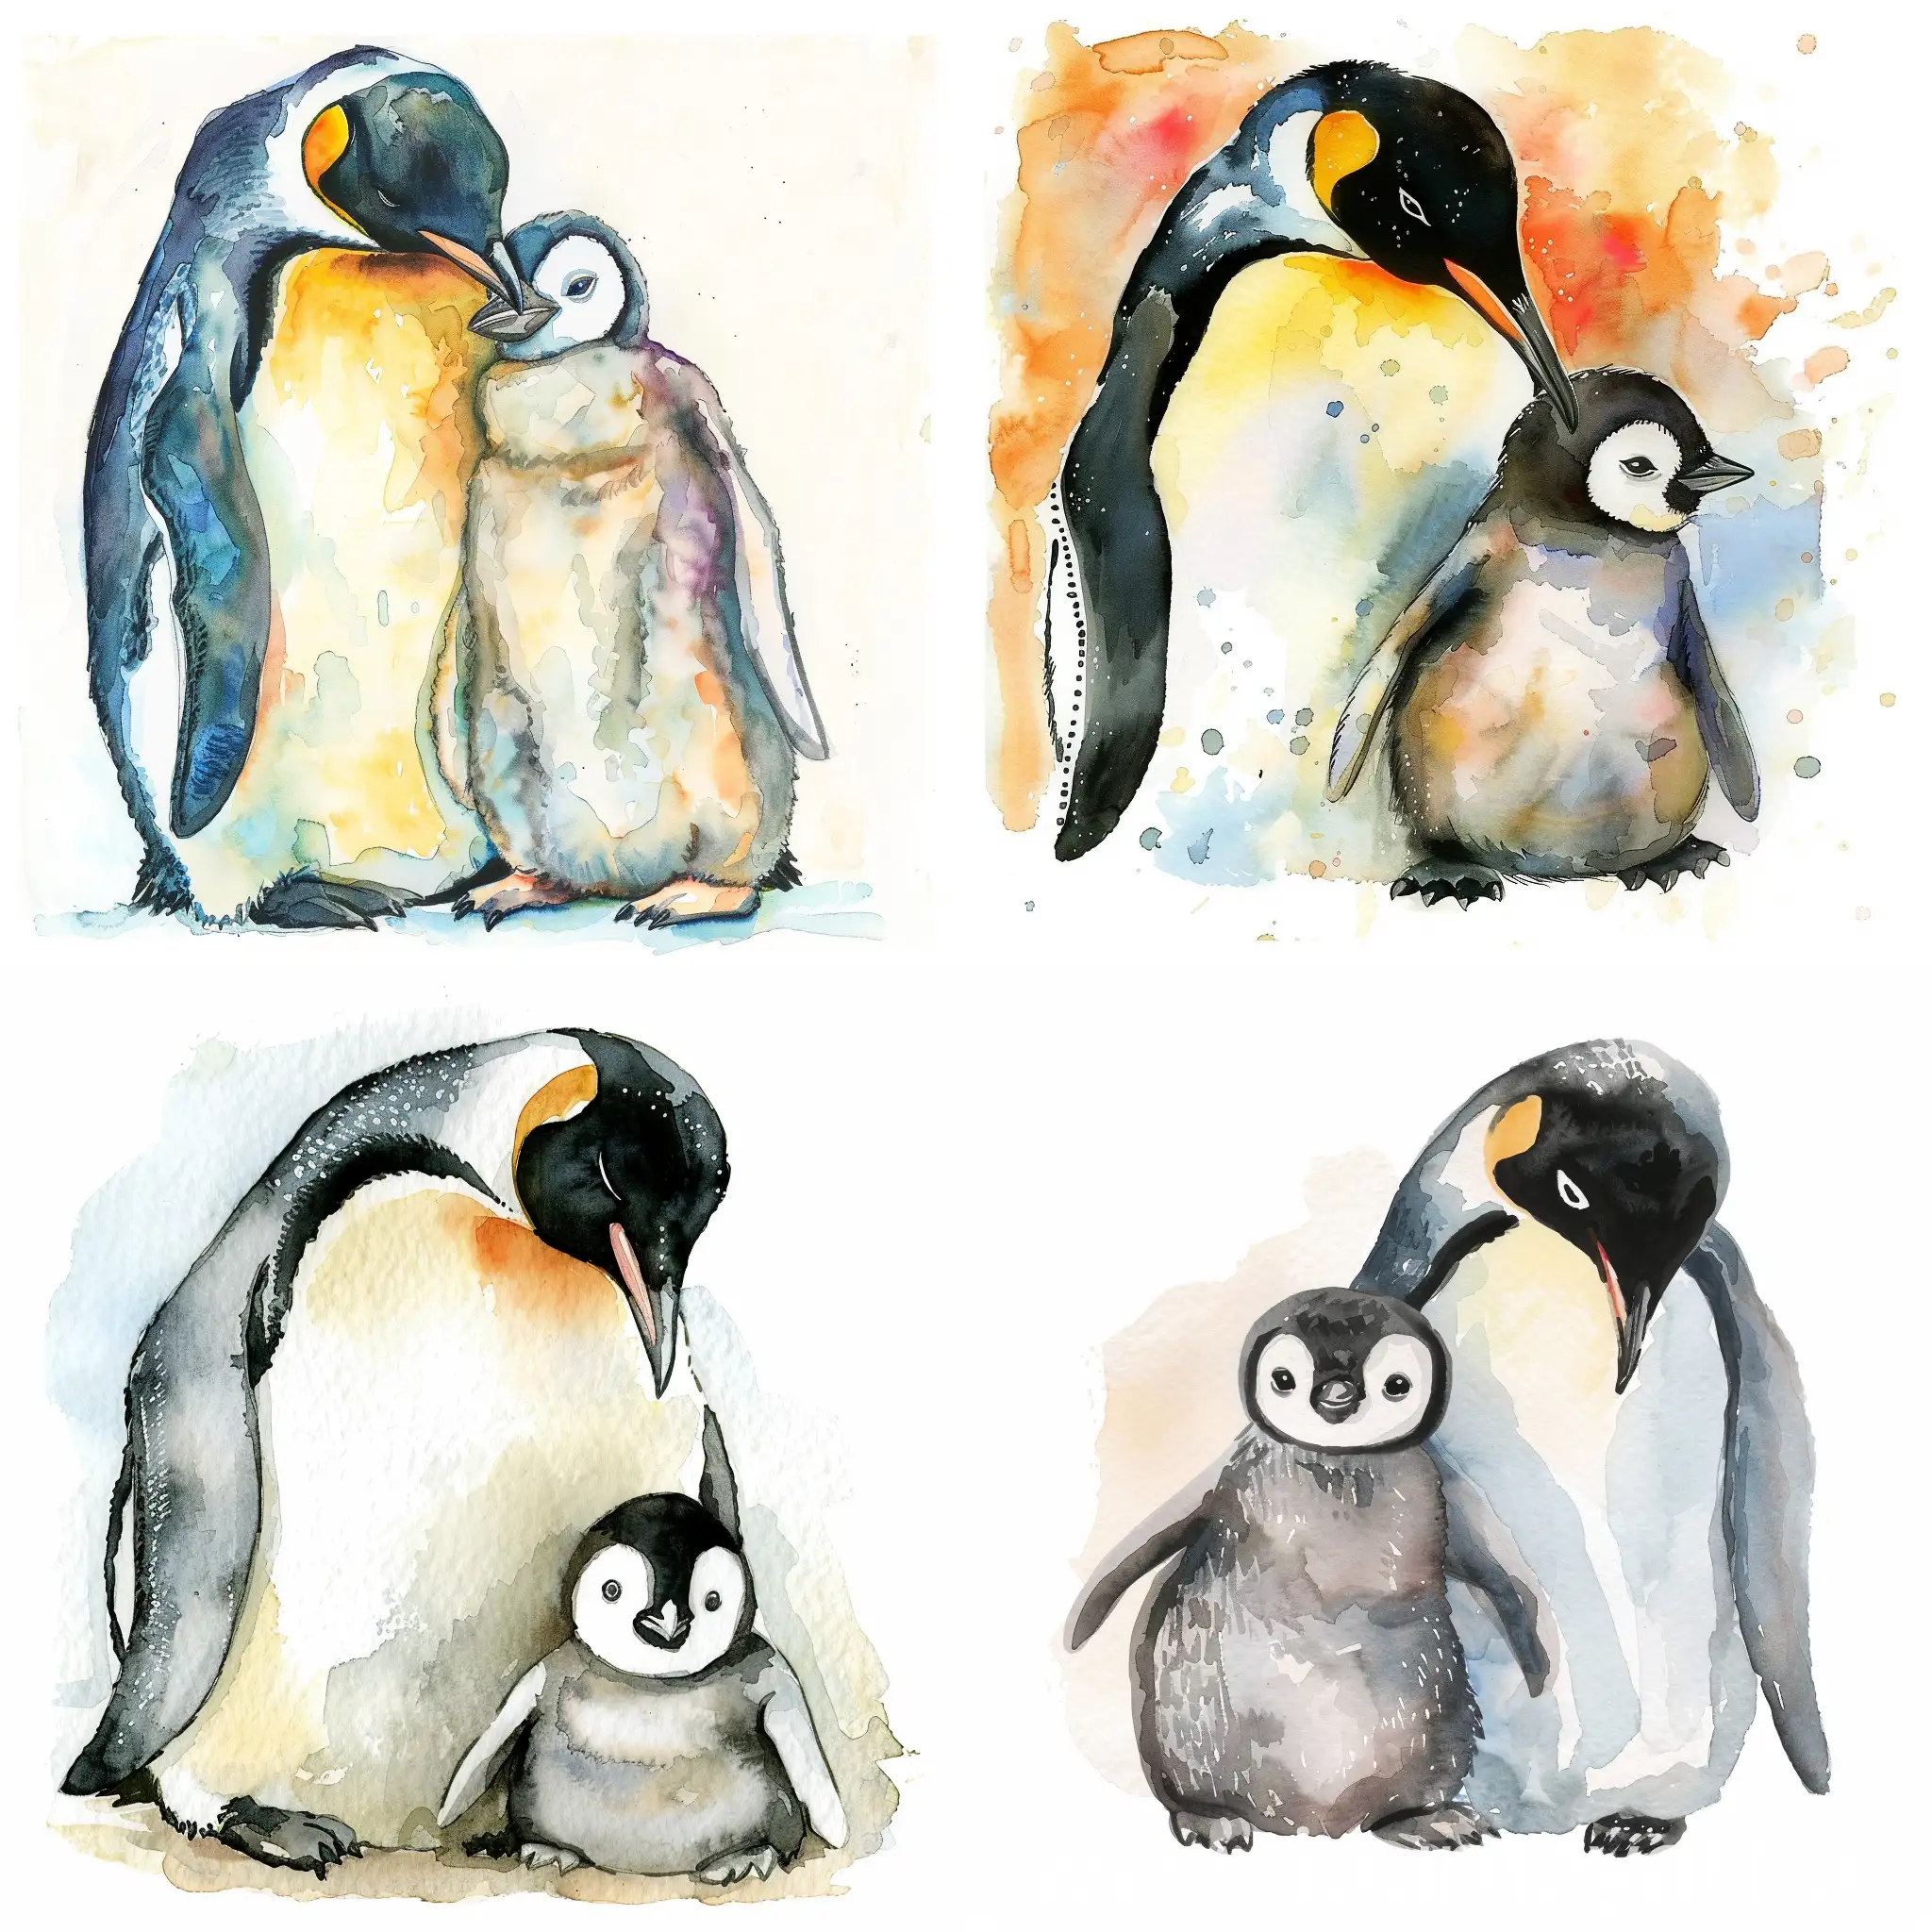 Watercolor baby room nursery wall art. Use pastel colors. Wild baby penguin with mother penguin.